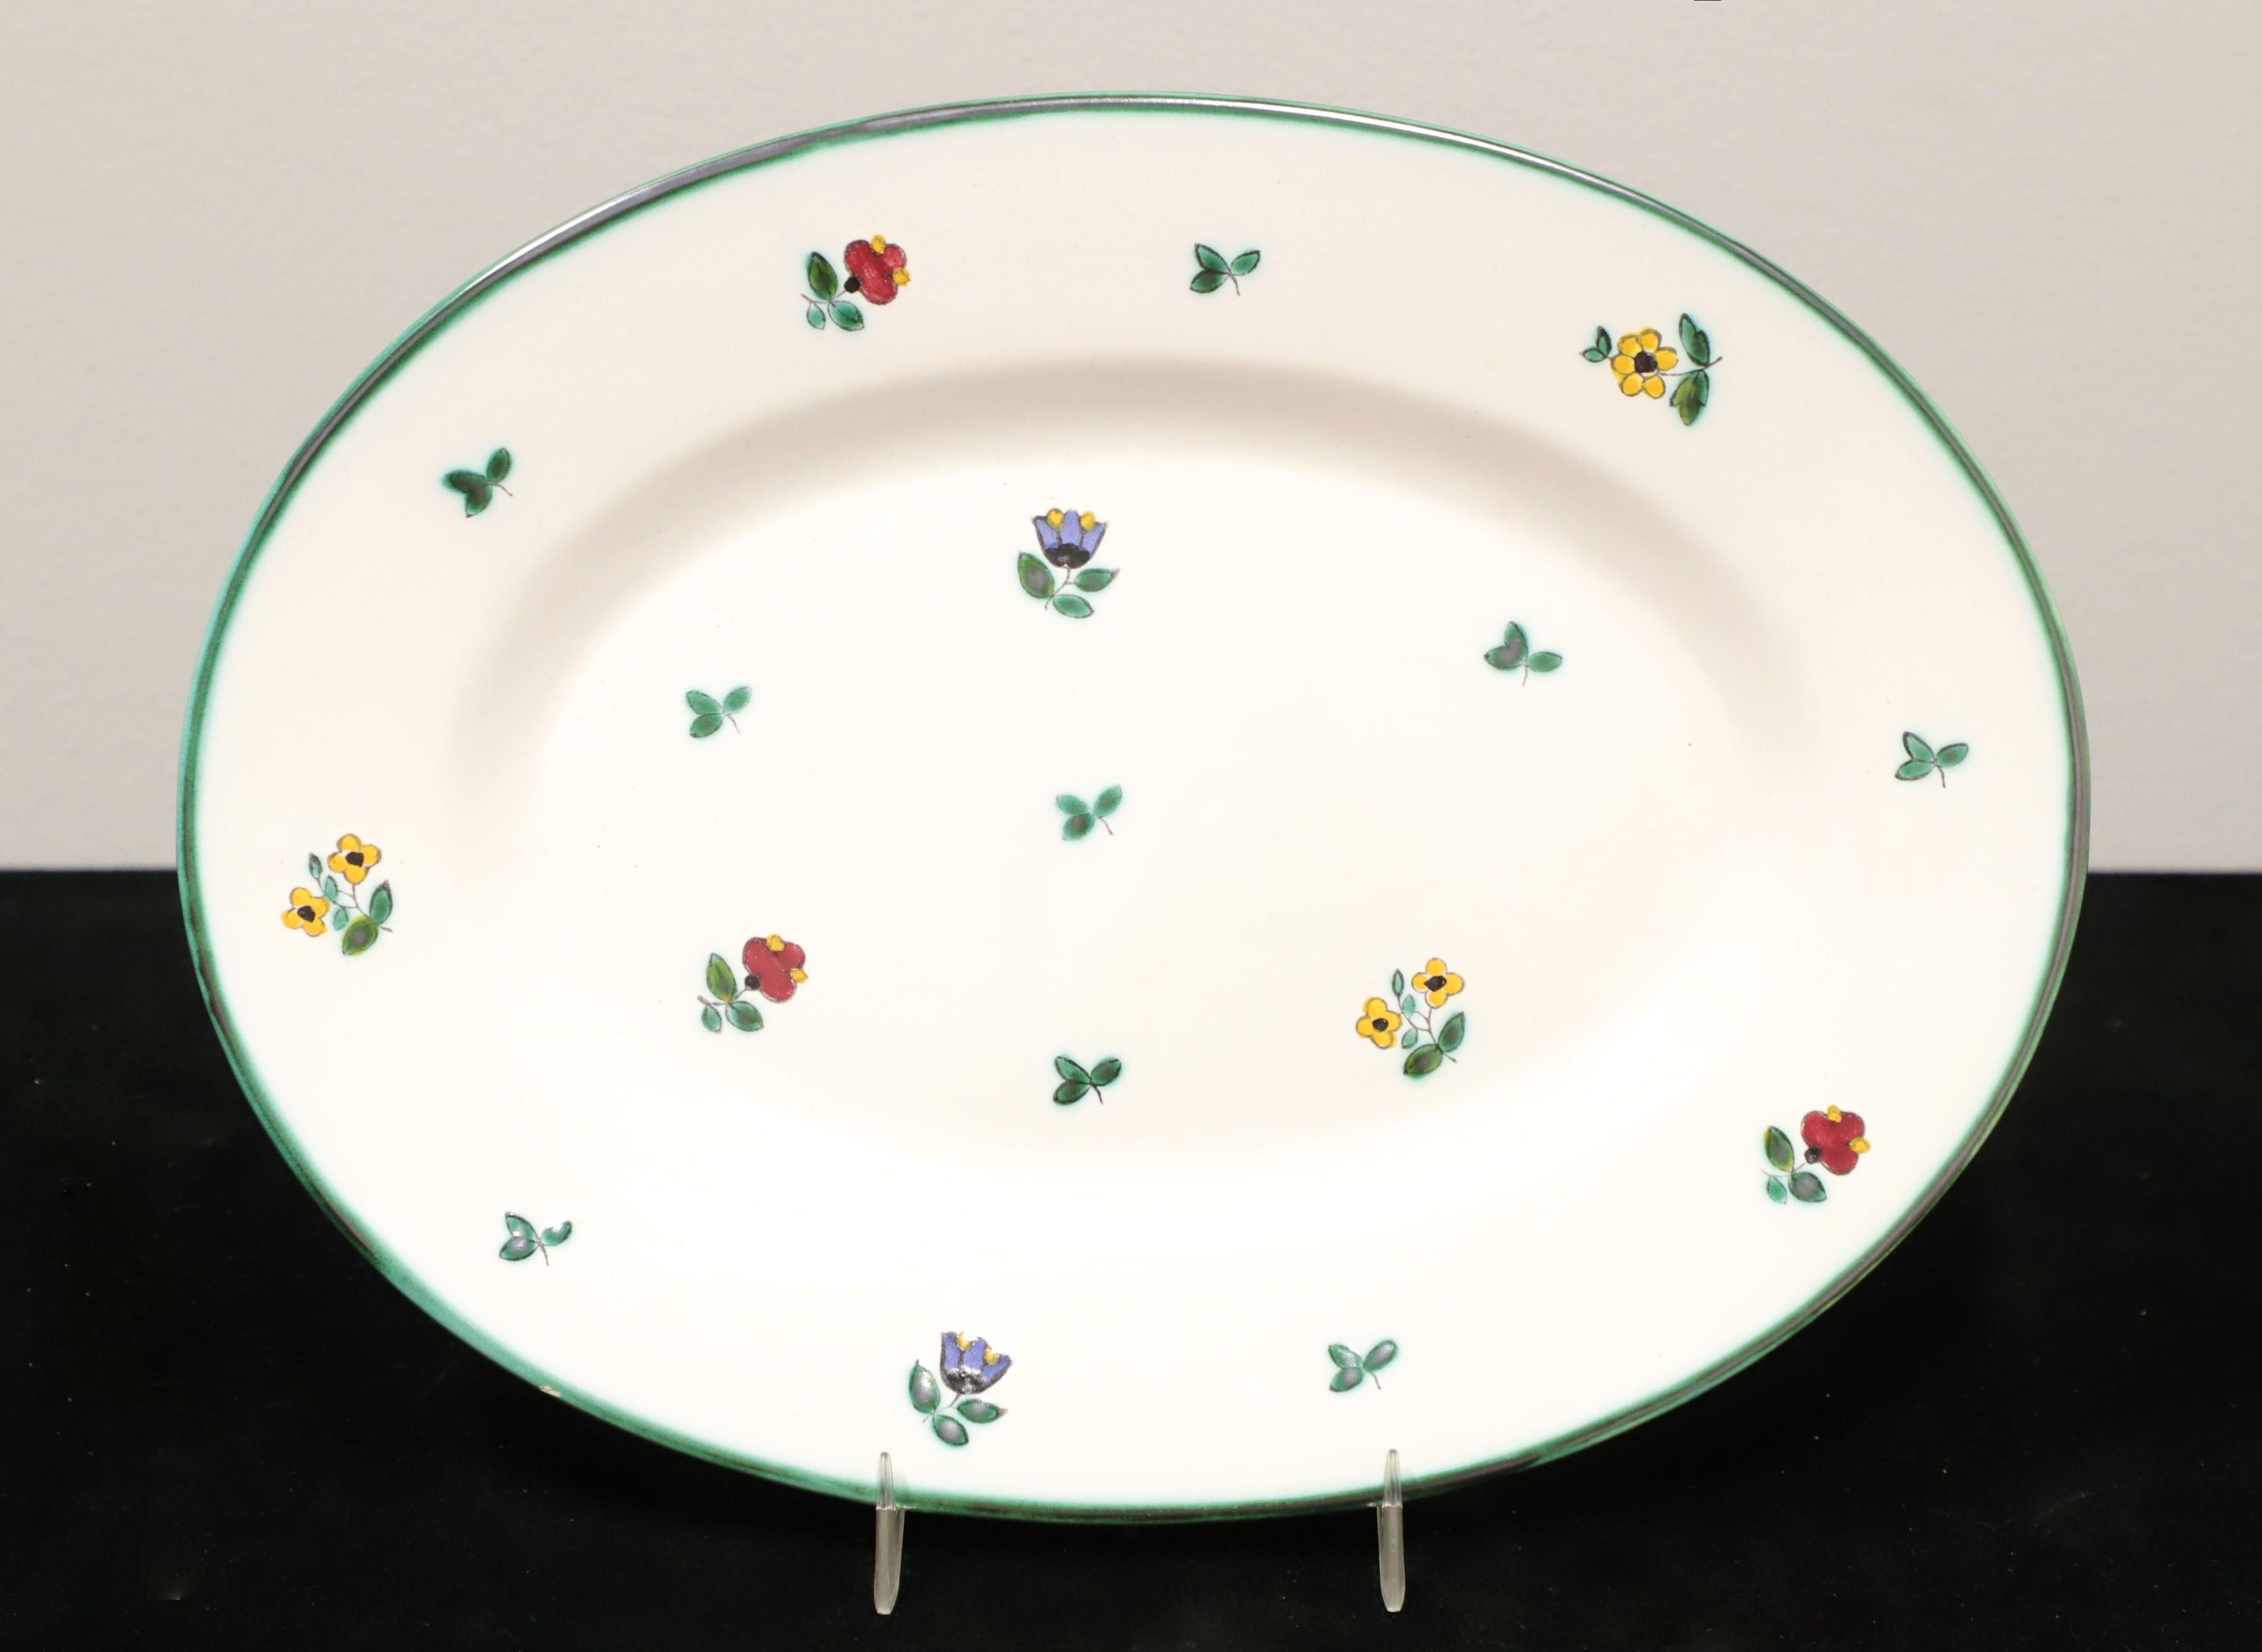 A set of four Mid 20th Century serving pieces by Gmundner Keramik, in their Streublumen (Scattered Flowers) pattern. All are hand made ceramic and hand painted depicting scattered various color flowers & green leaves with a solid green border. Set